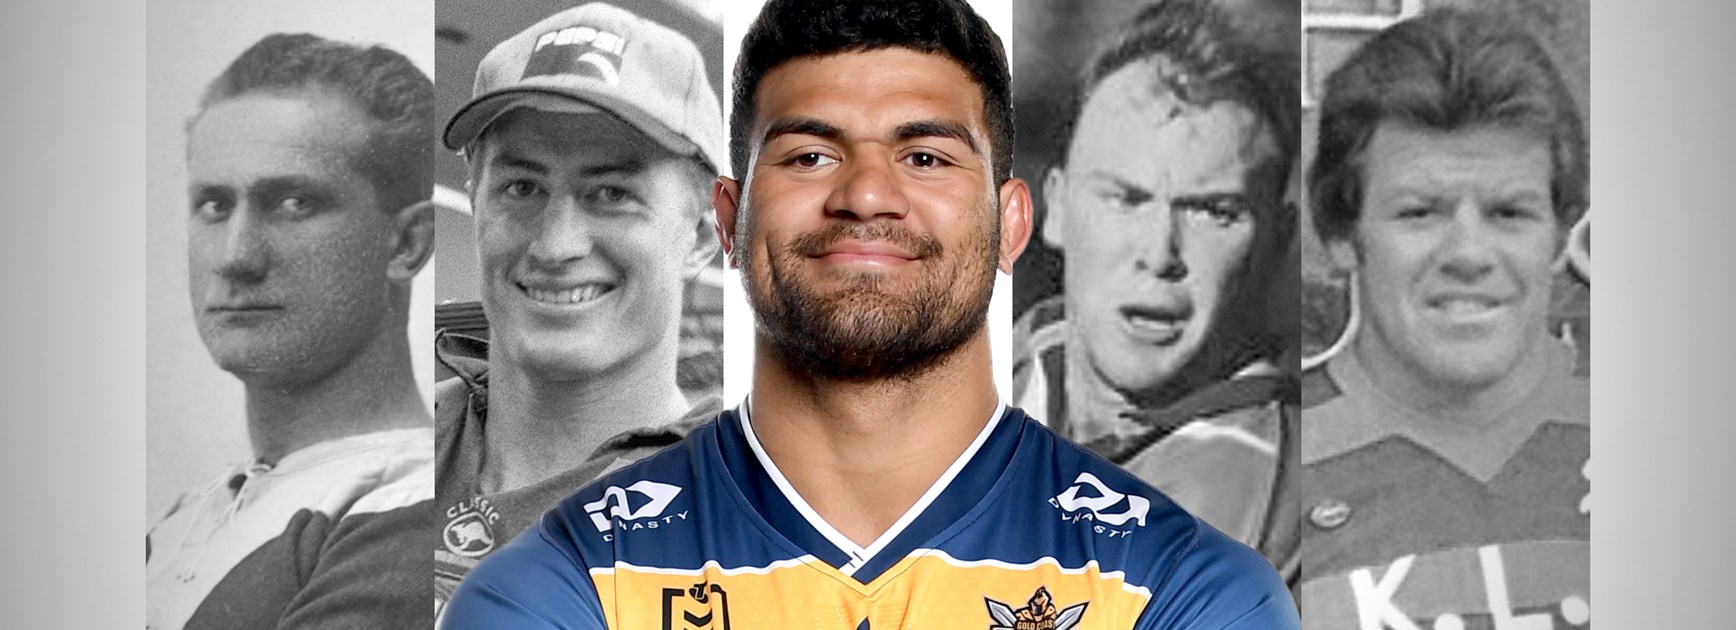 Fifita on verge of joining four best try-scoring forwards in history